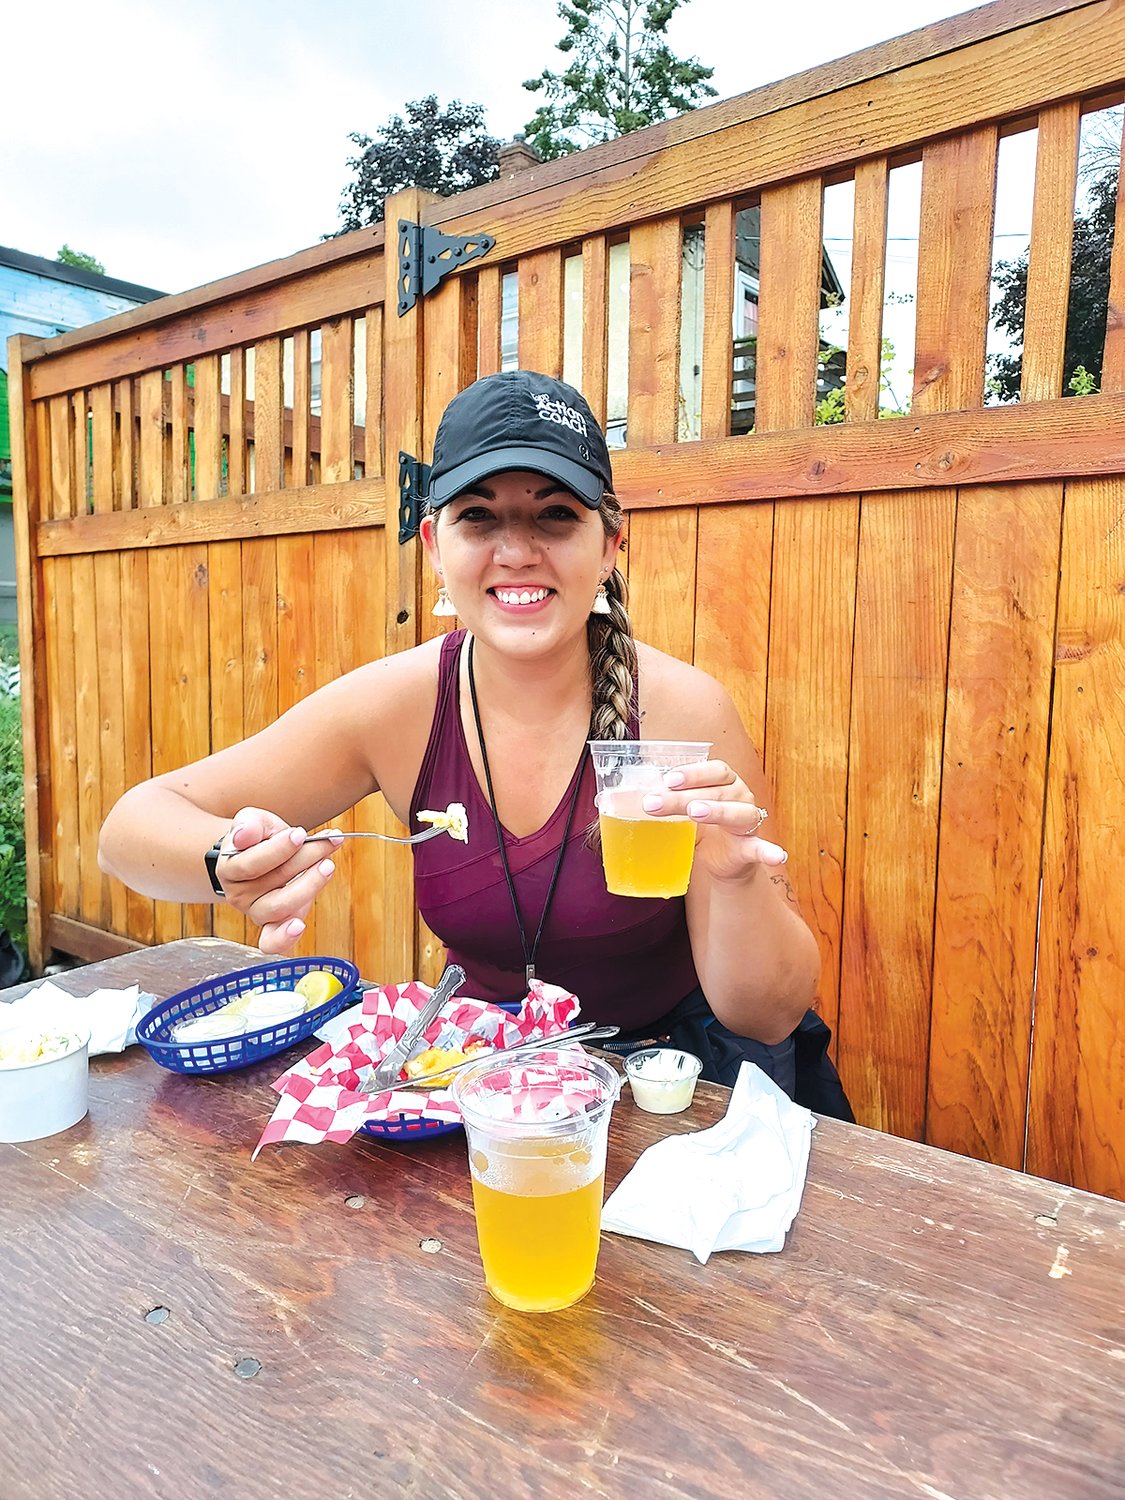 NEBA member and home-based business owner Ashley Tapp of Tapp ActionCOACH enjoys a tasty meal during the 2021 community festival.